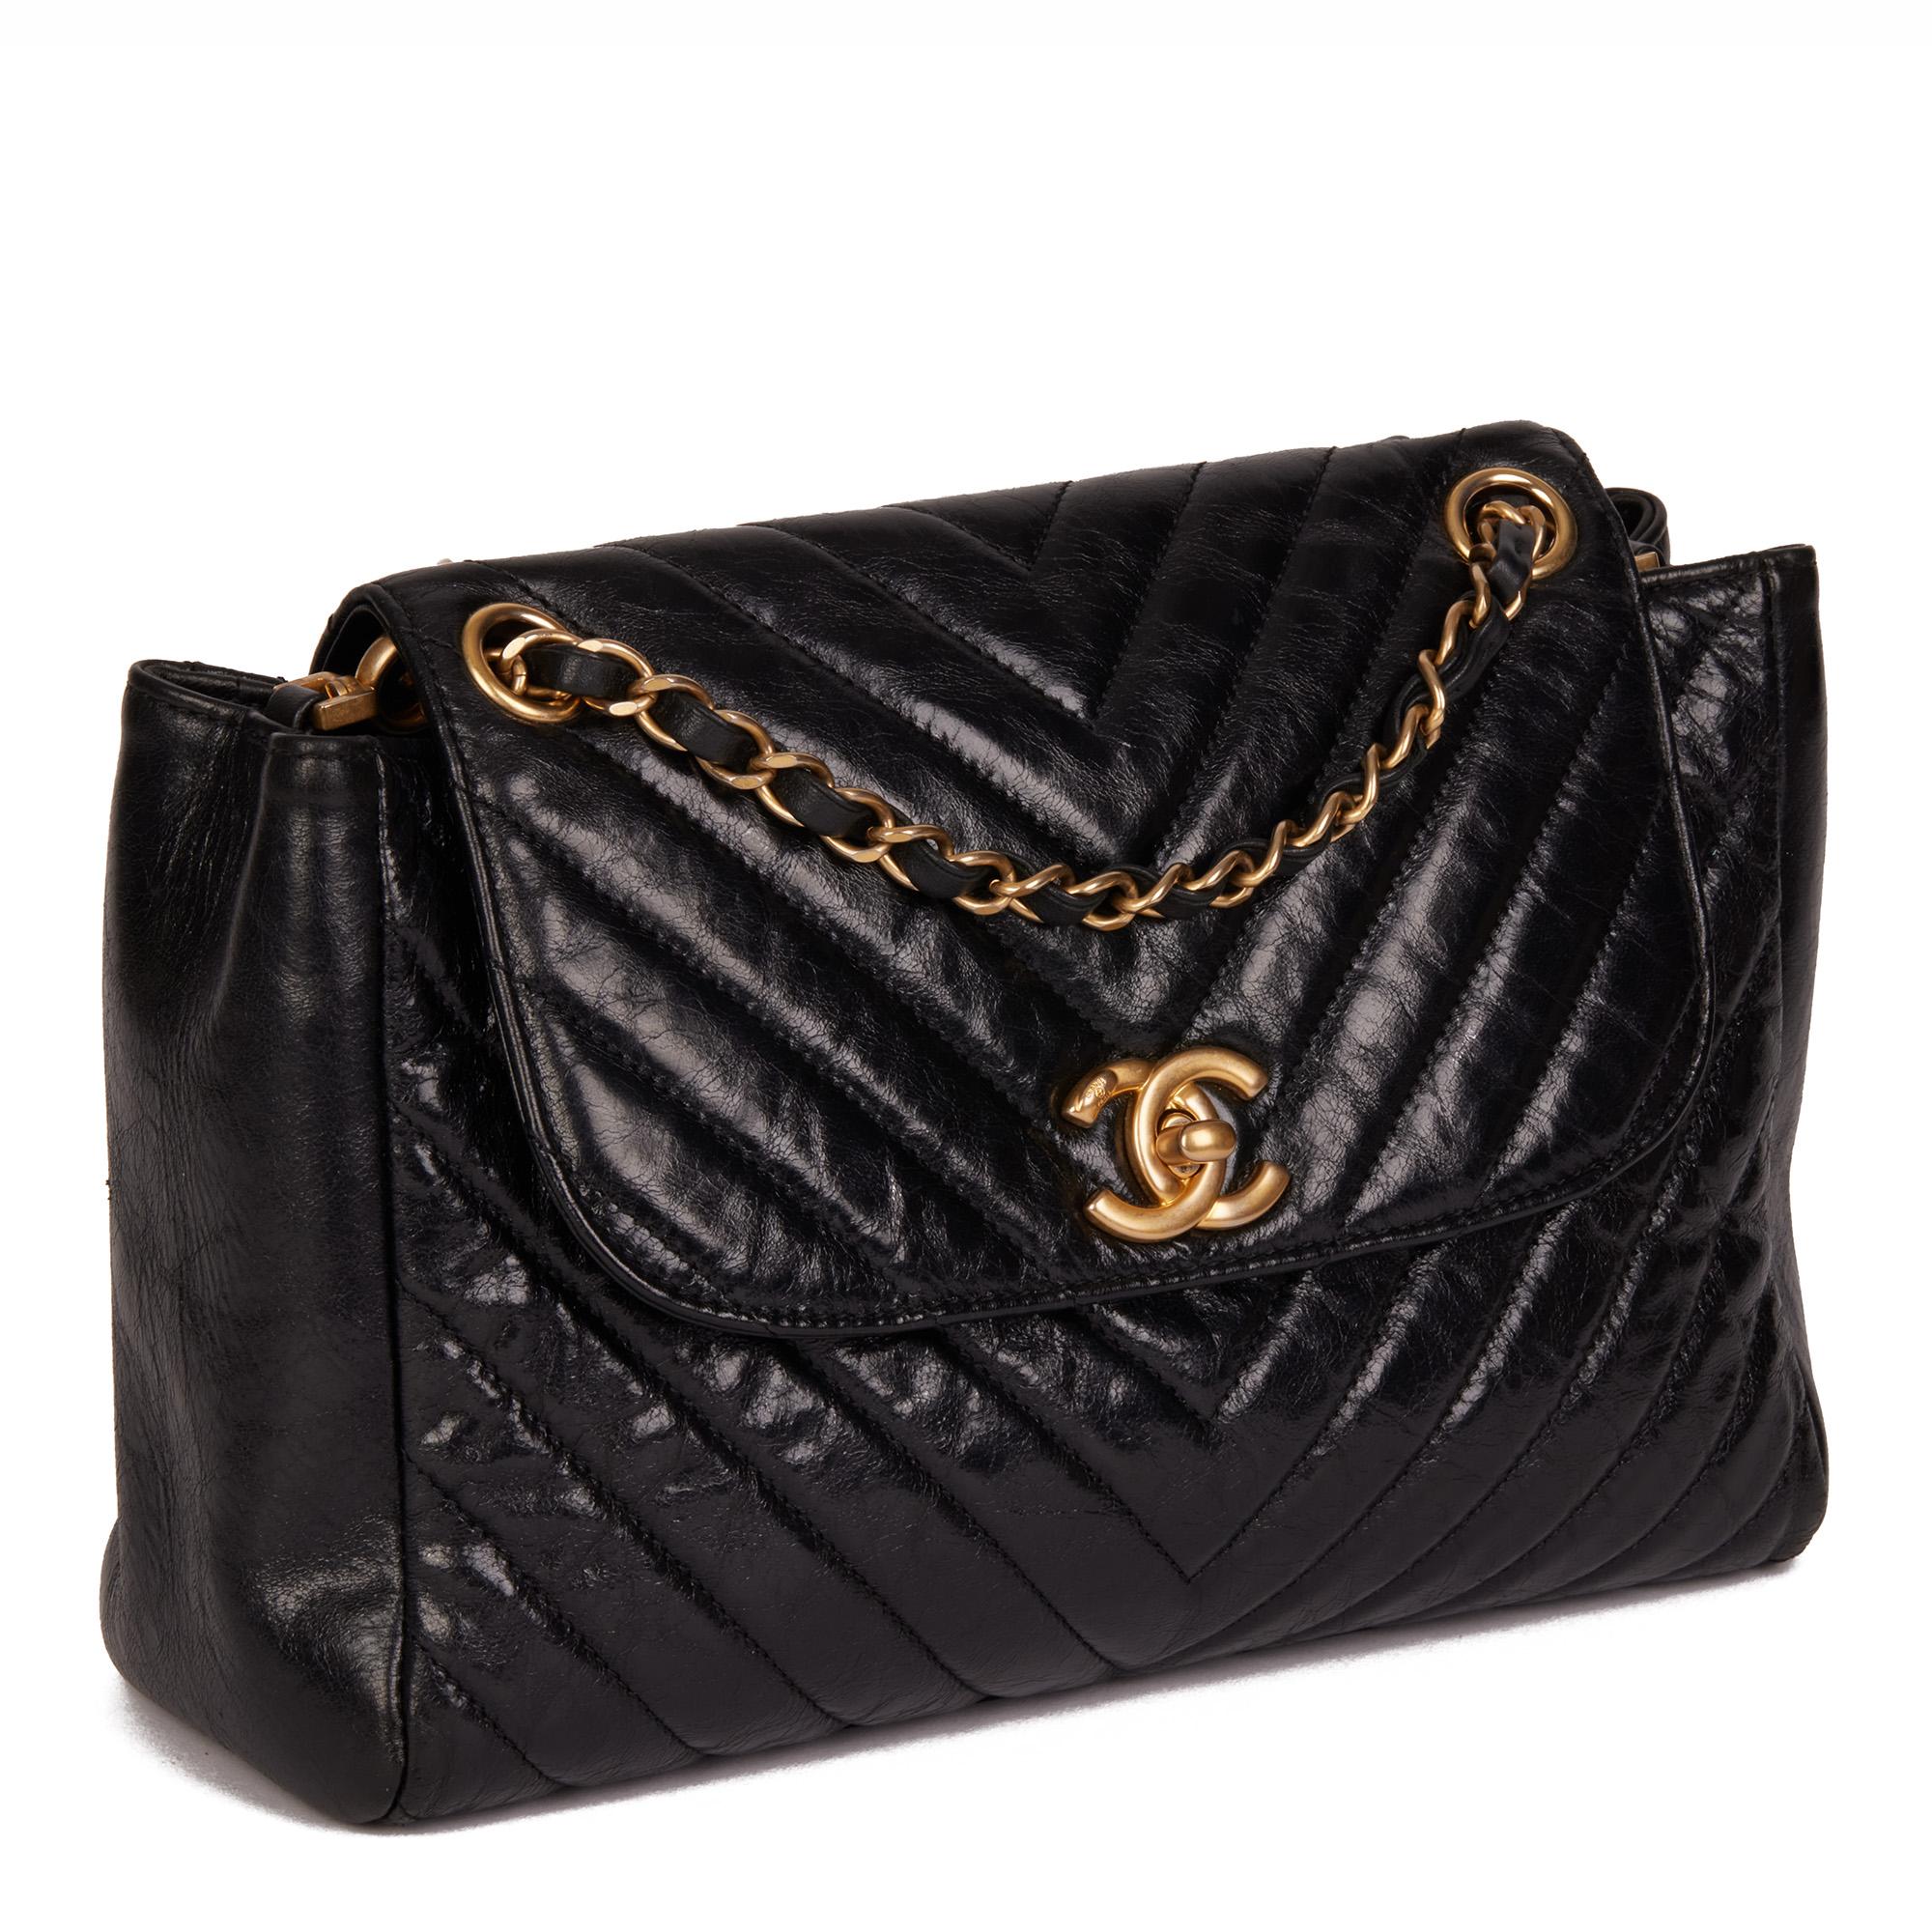 CHANEL
Black Chevron Quilted Crumpled Calfskin Leather Classic Single Flap Bag

Xupes Reference: HB4345
Serial Number: 26454700
Age (Circa): 2019
Accompanied By: Chanel Dust Bag, Authenticity Card
Authenticity Details: Authenticity Card, Serial